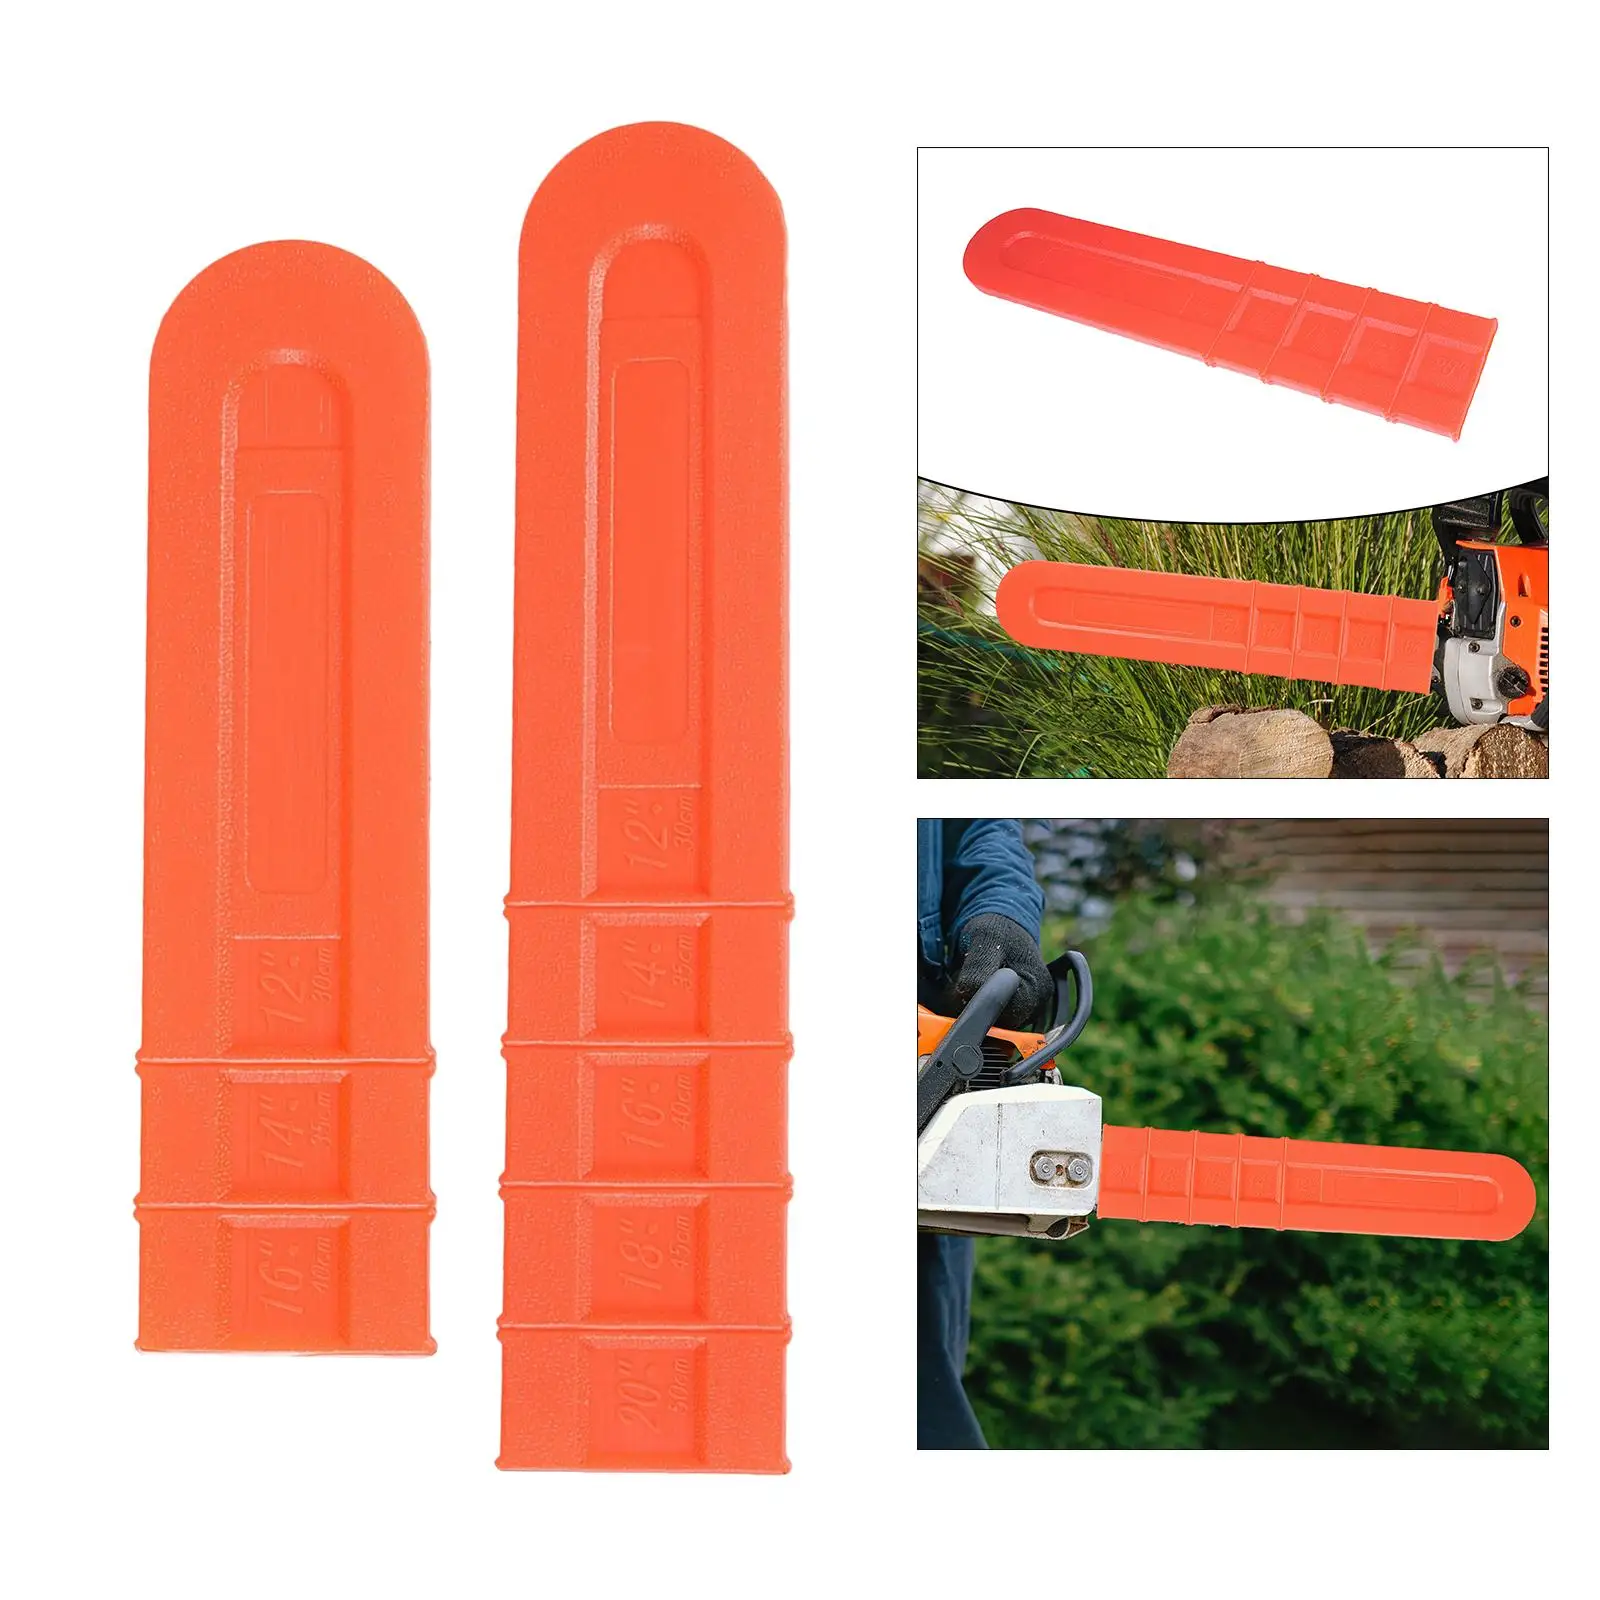 Durable Chainsaw Bar Protective Cover Scabbard Guard Garden Tools Accessories Chainsaw cover for Garden Replacement